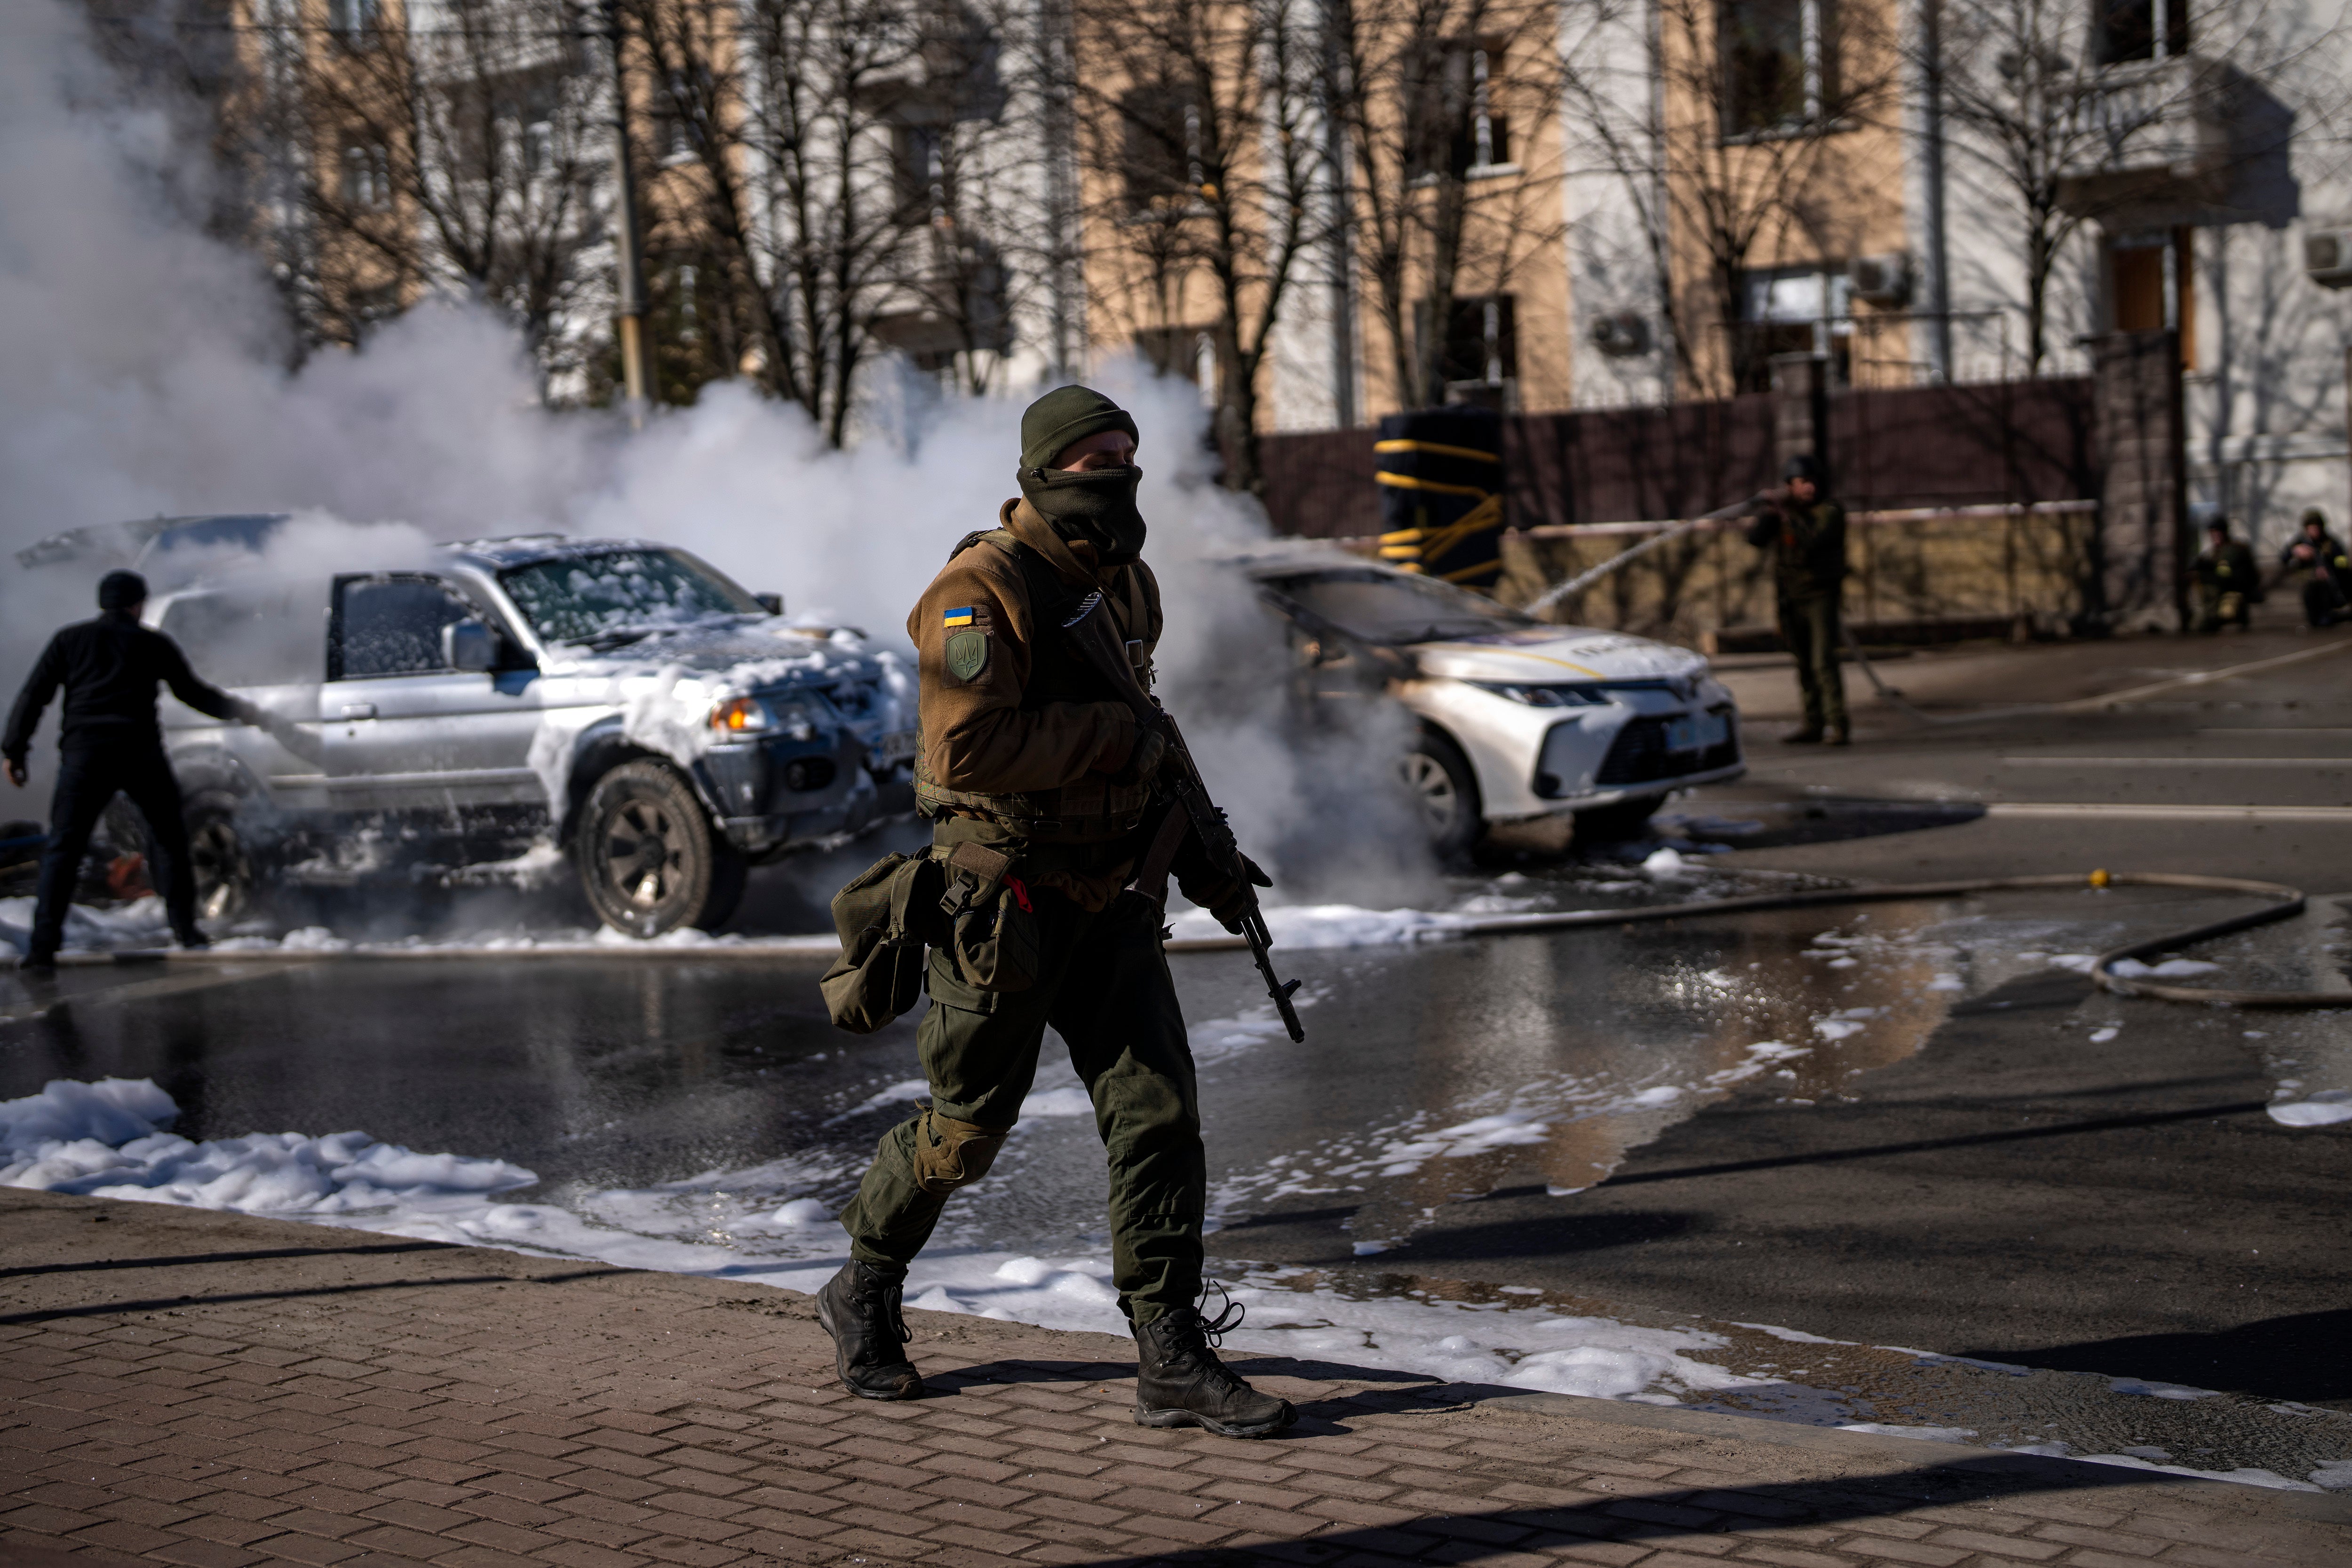 Ukrainian soldiers take positions outside a military facility as two cars burn in a Kyiv street, on Saturday